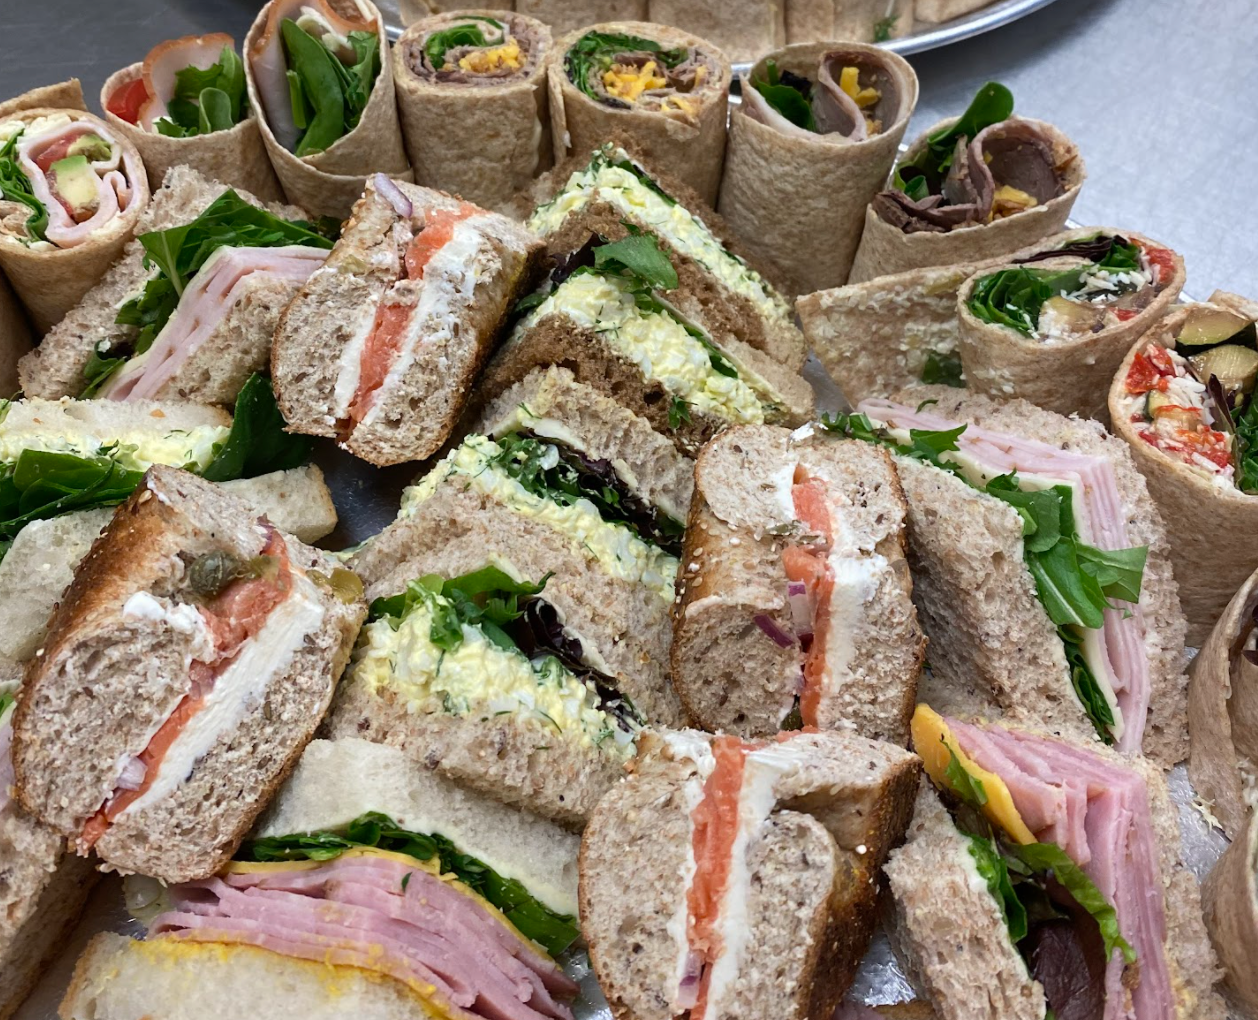 MeMe's Cafe catering featuring our famous sandwich platter, including cream cheese and salmon bagels, vegetarian wraps, and ham and cheddar sandwiches.